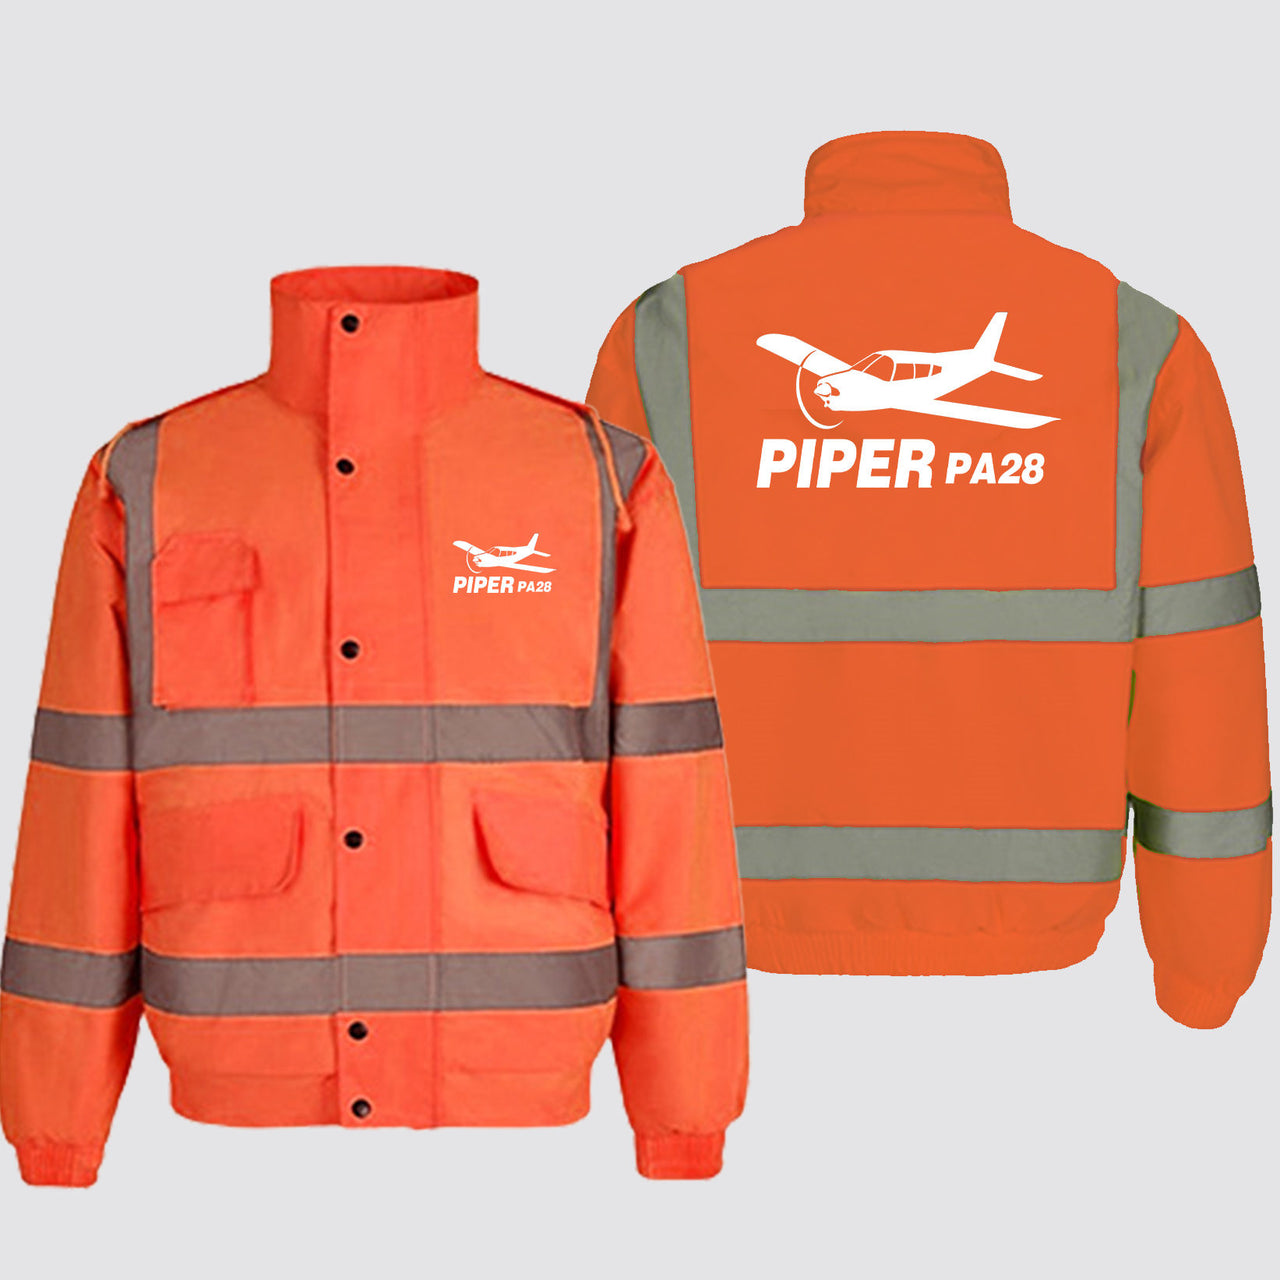 The Piper PA28 Designed Reflective Winter Jackets